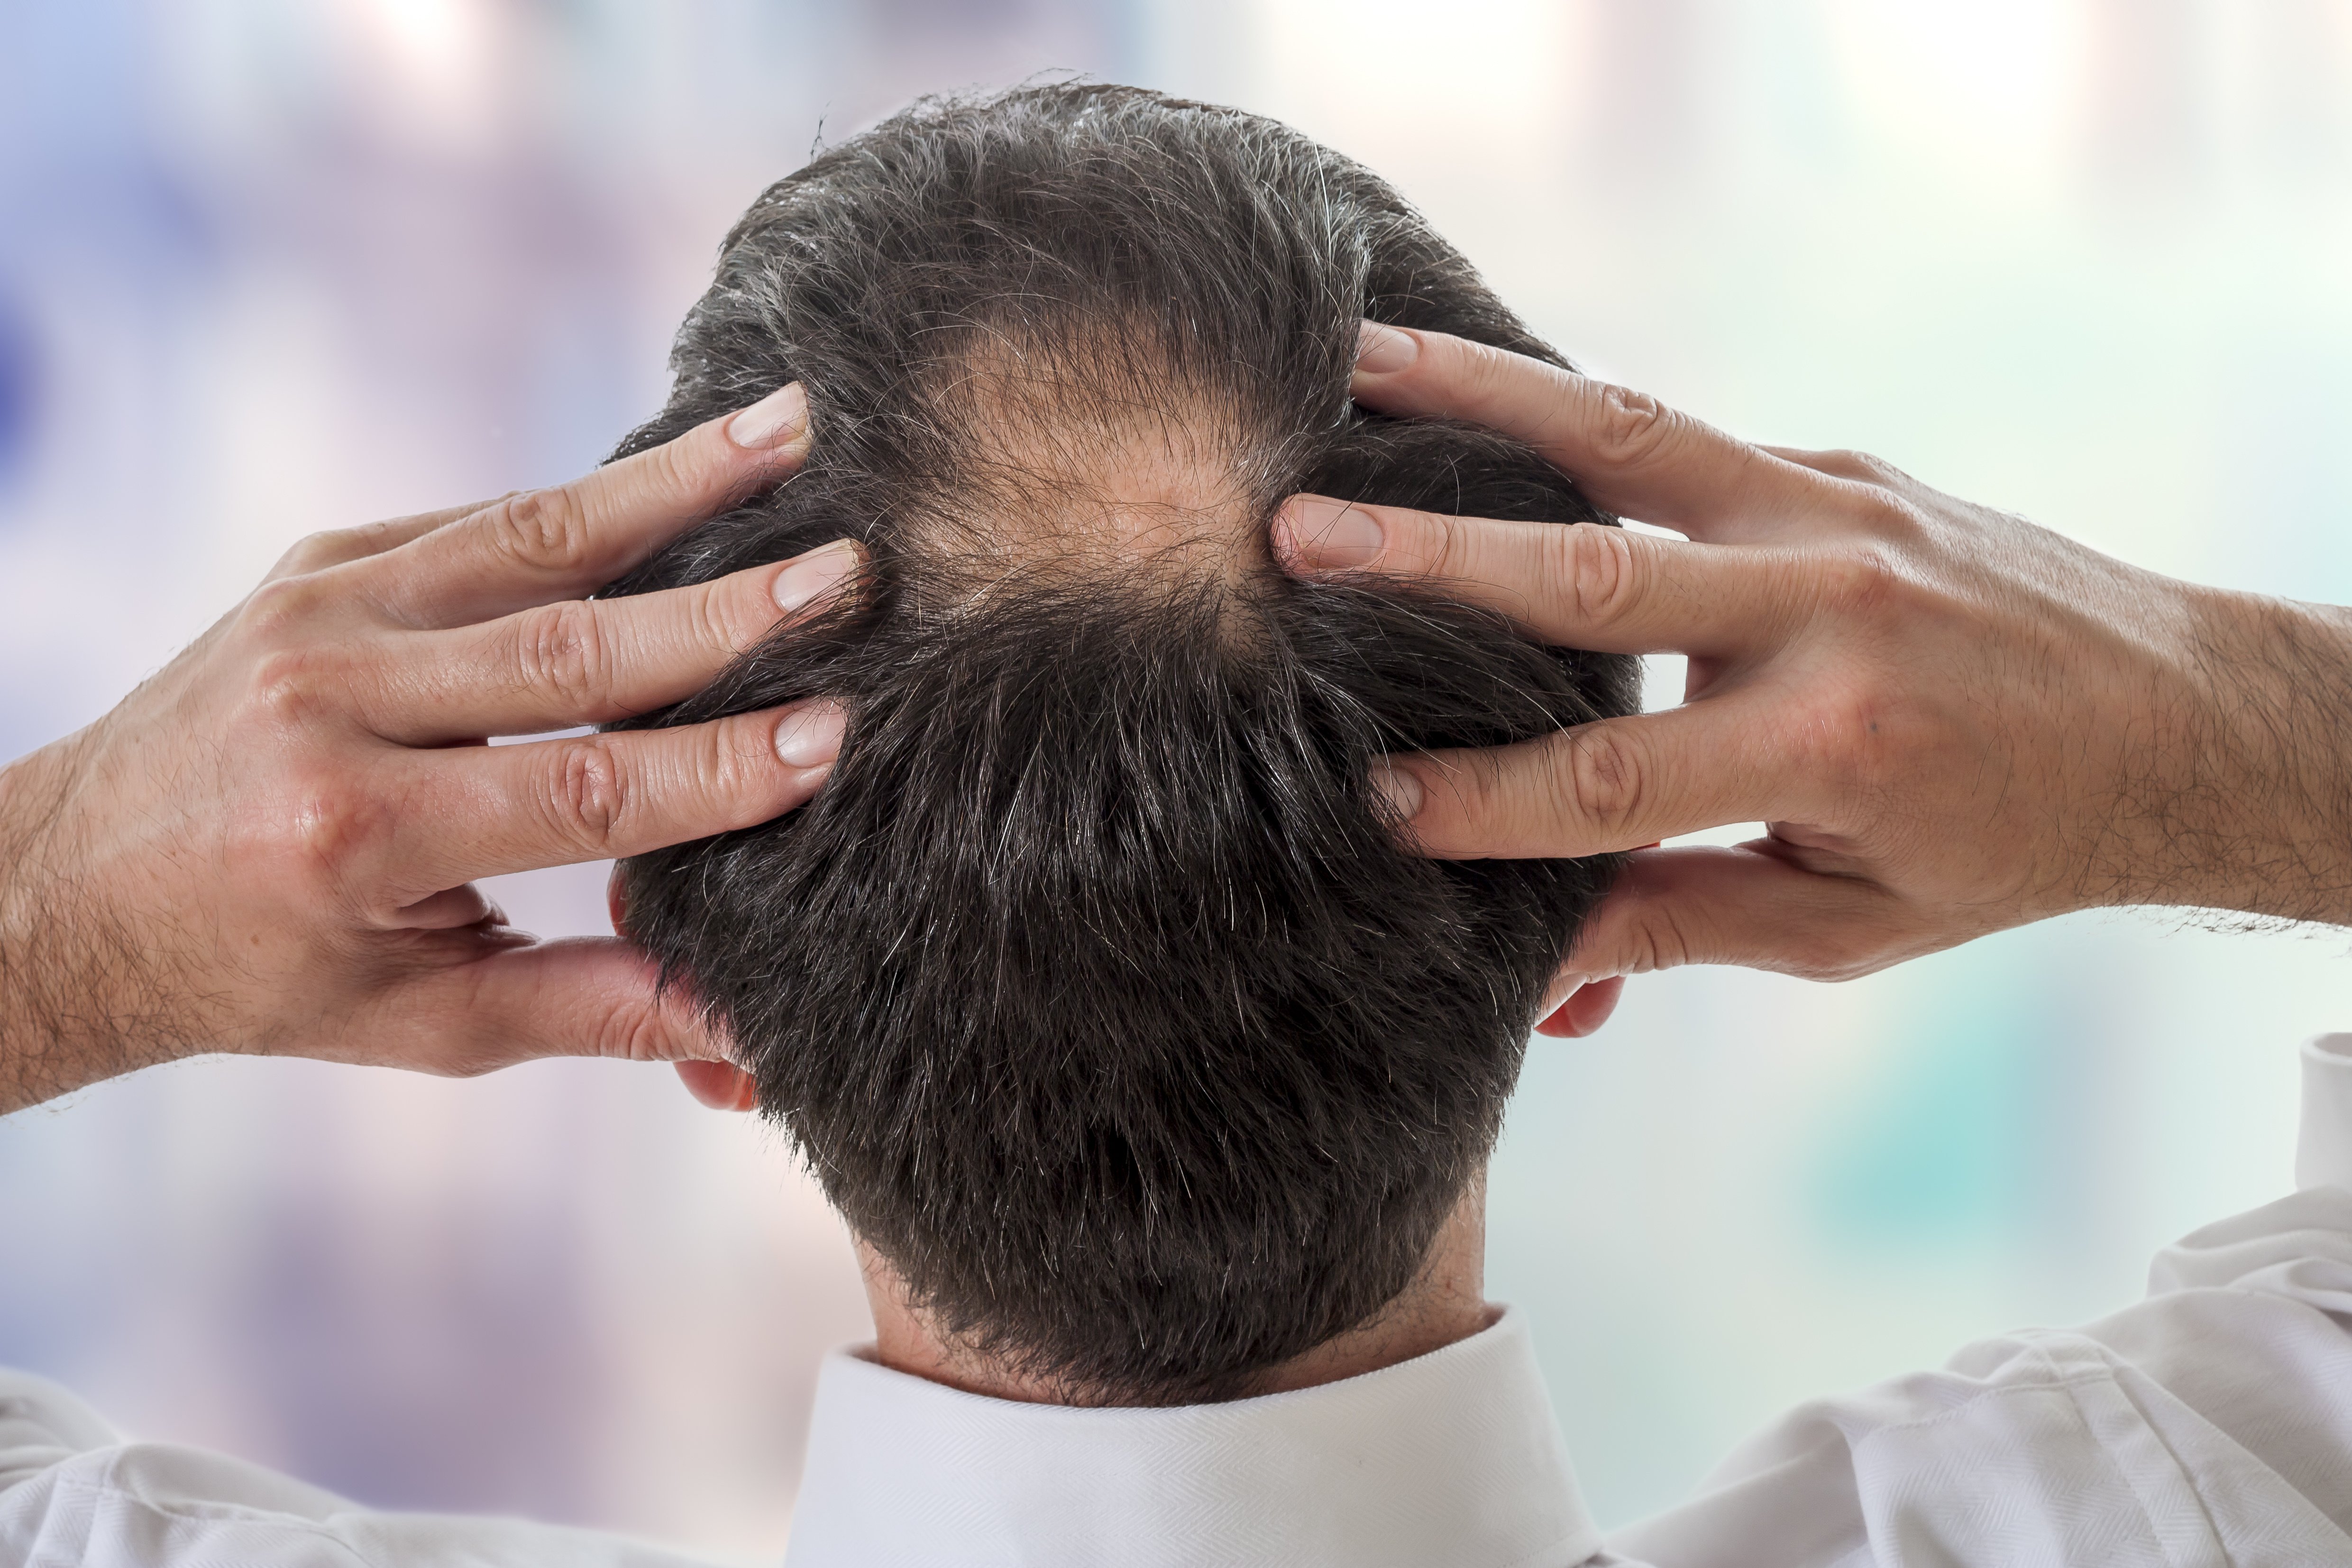 The Hair Loss Drug Propecia Carries Risks: How Does It Help Treat Hair Loss?